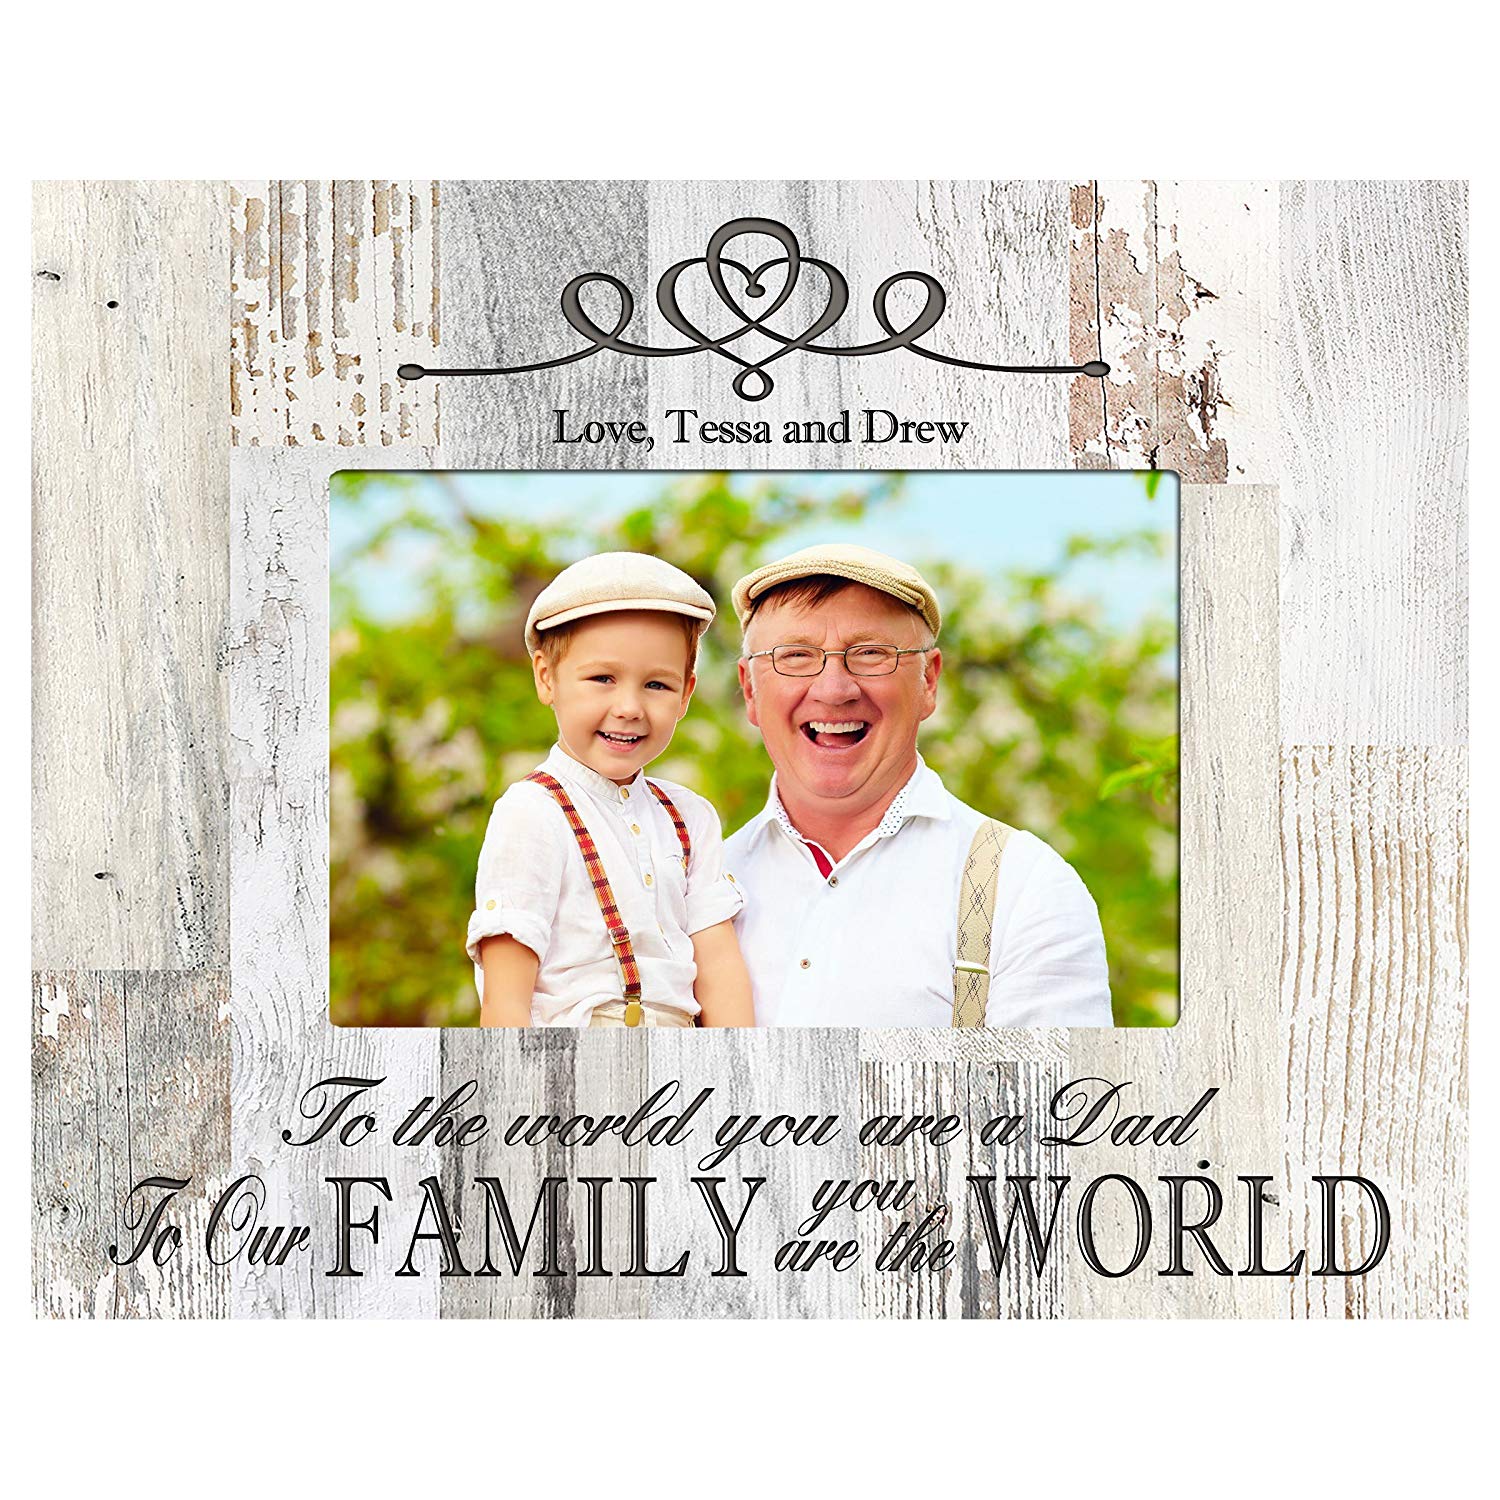 Personalized Engraved Birthday Picture Frame Gift for Dad - World - LifeSong Milestones